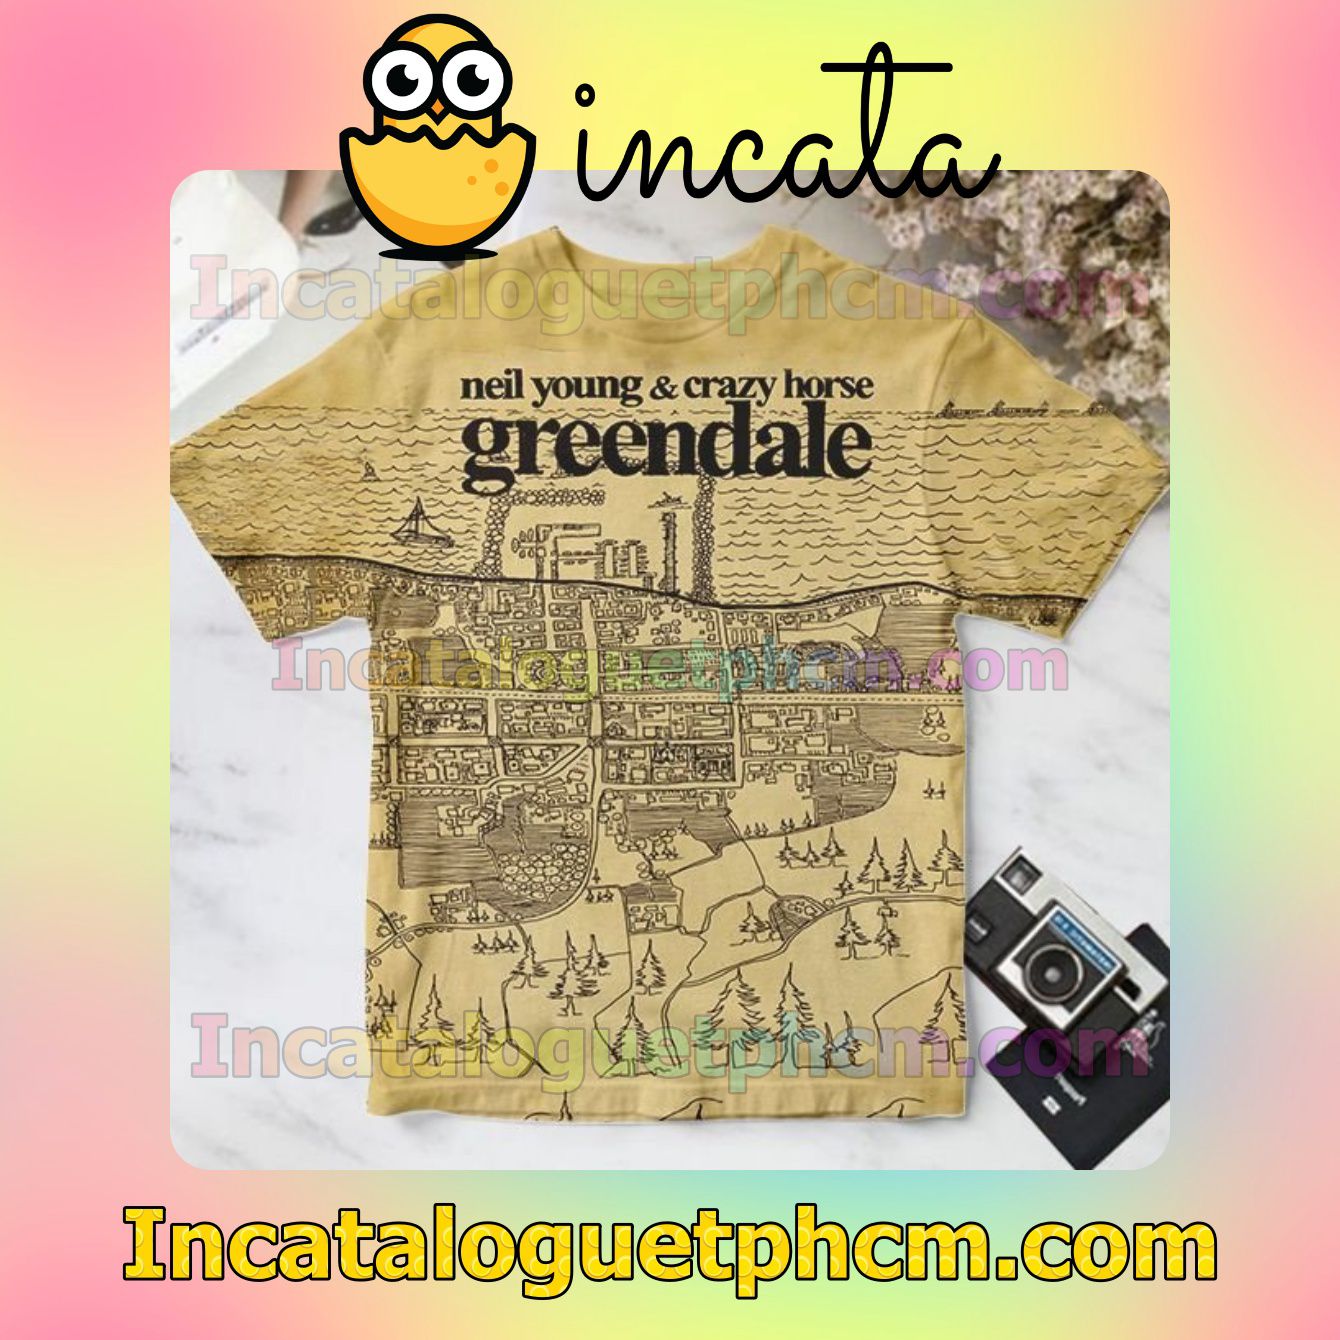 Neil Young And Crazy Horse Greendale Album Cover Personalized Shirt